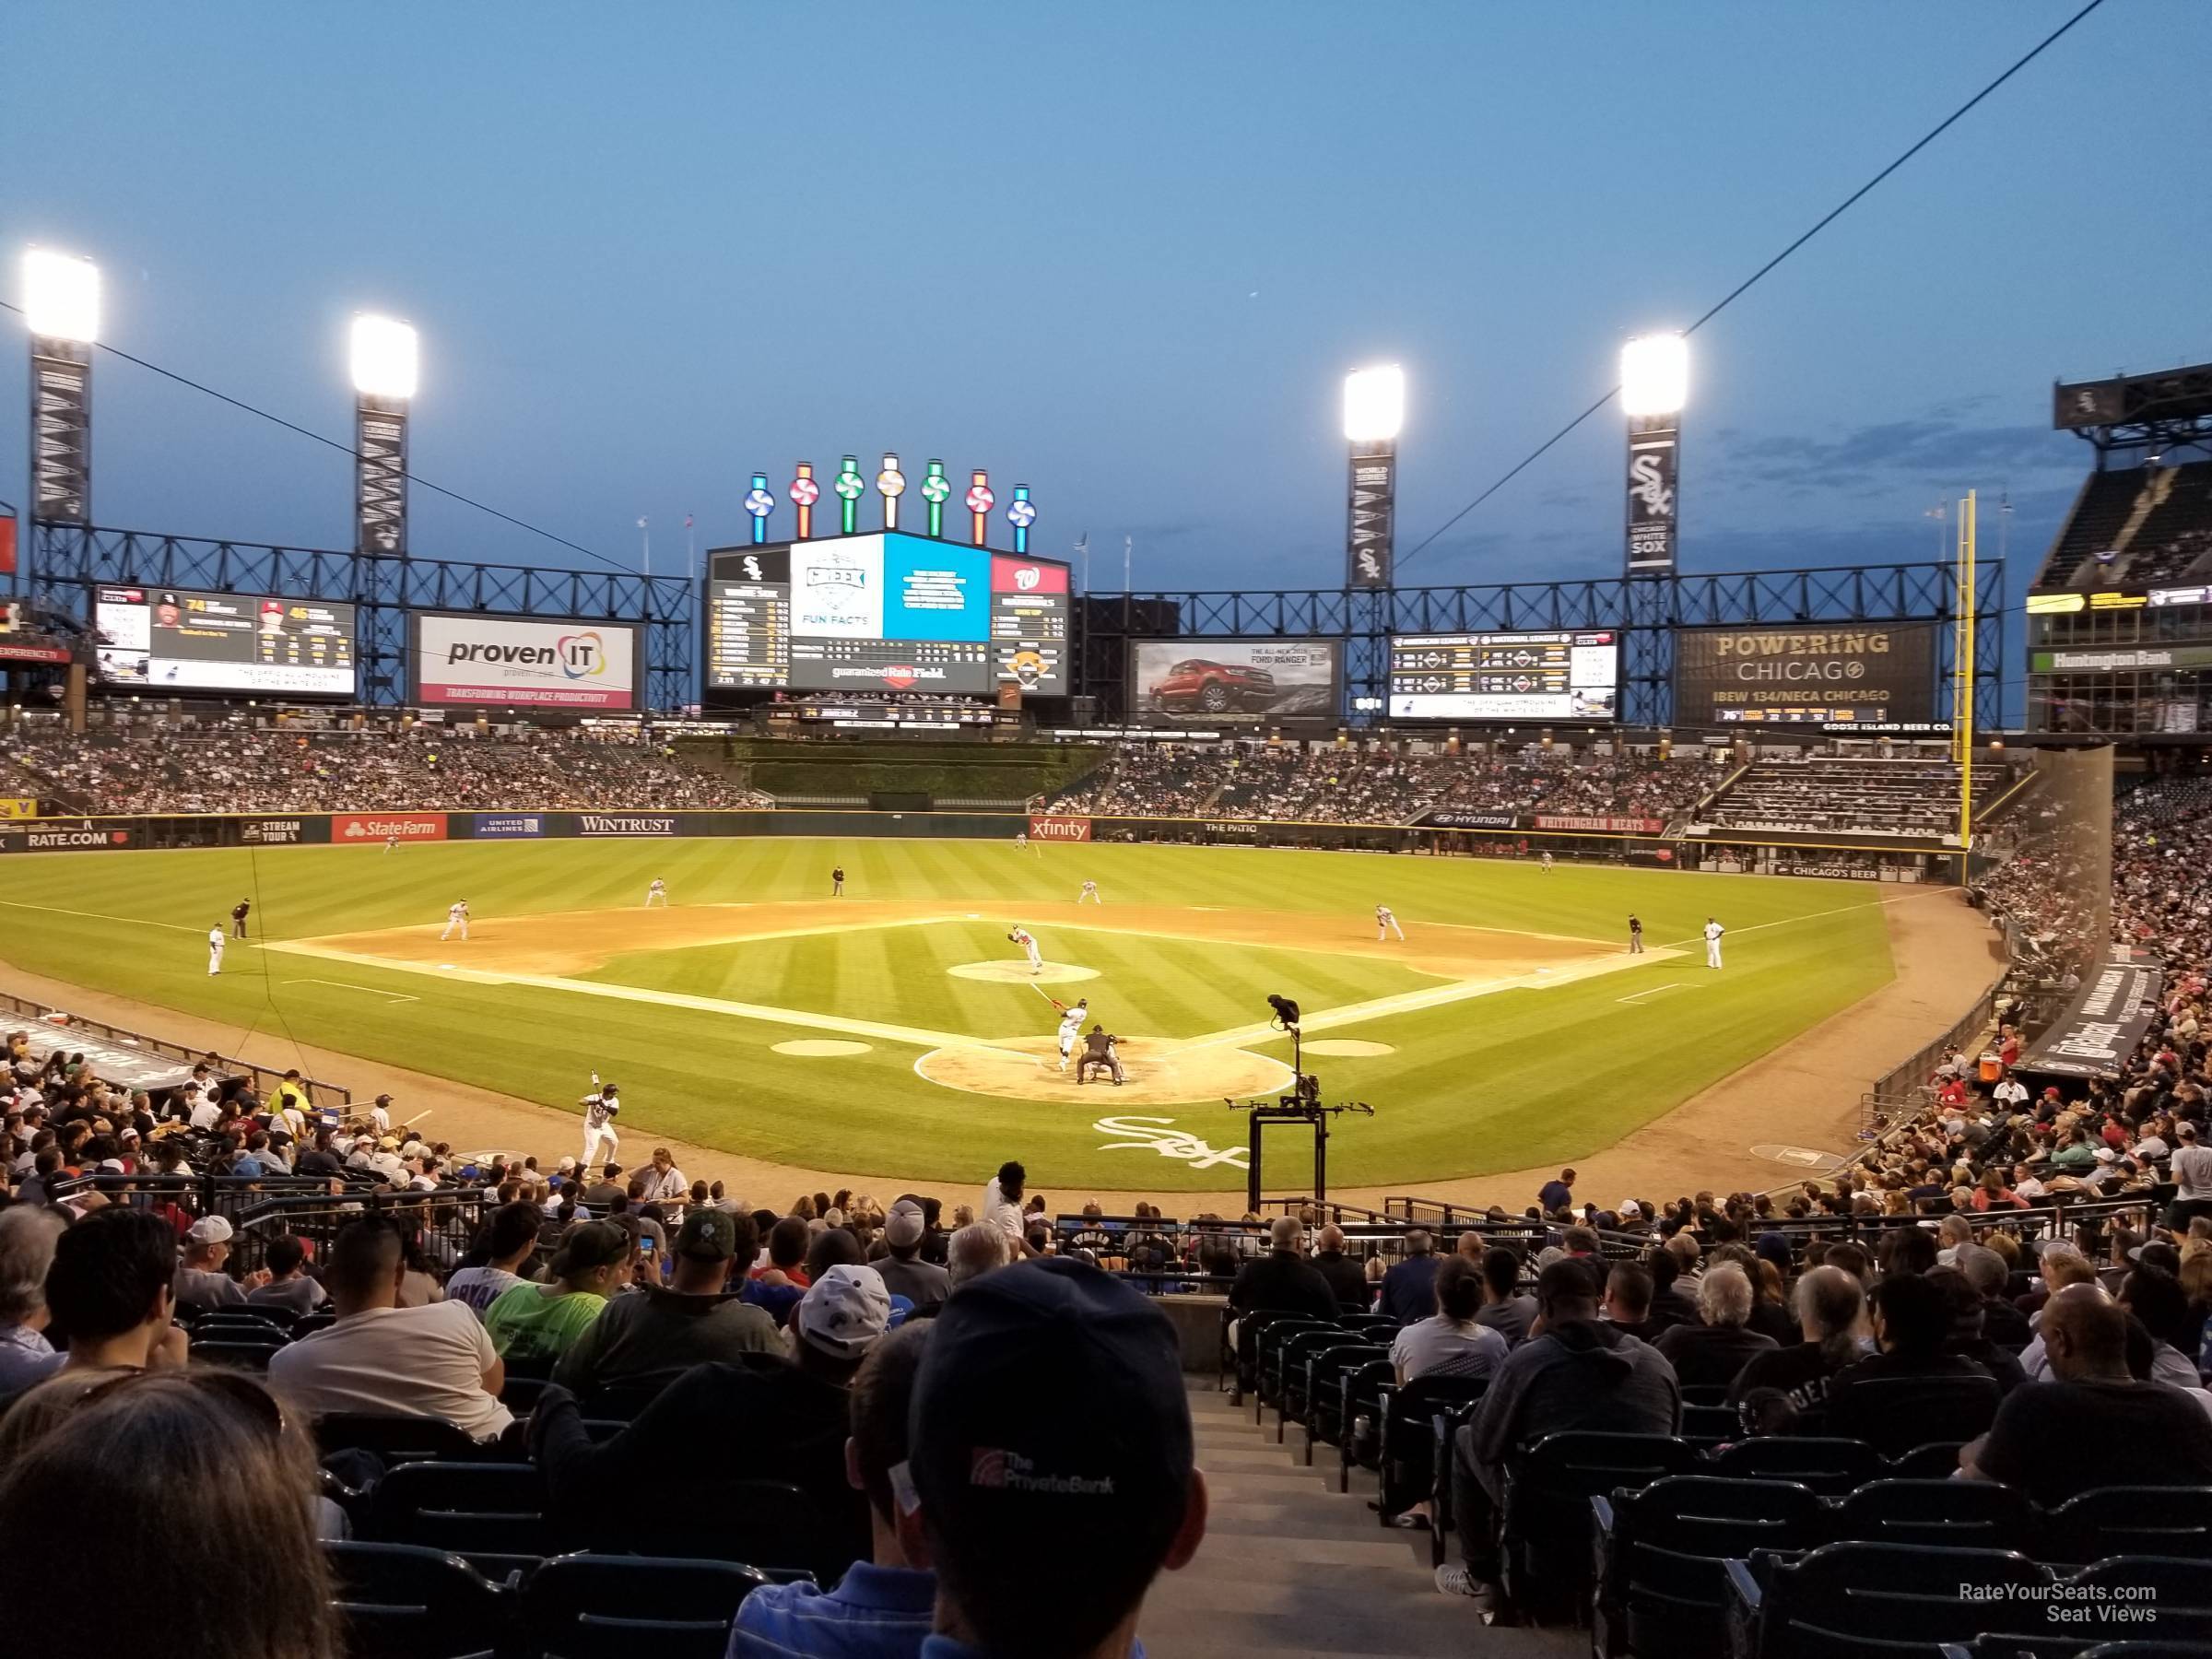 Guaranteed Rate Field: The ultimate guide to the home of the White